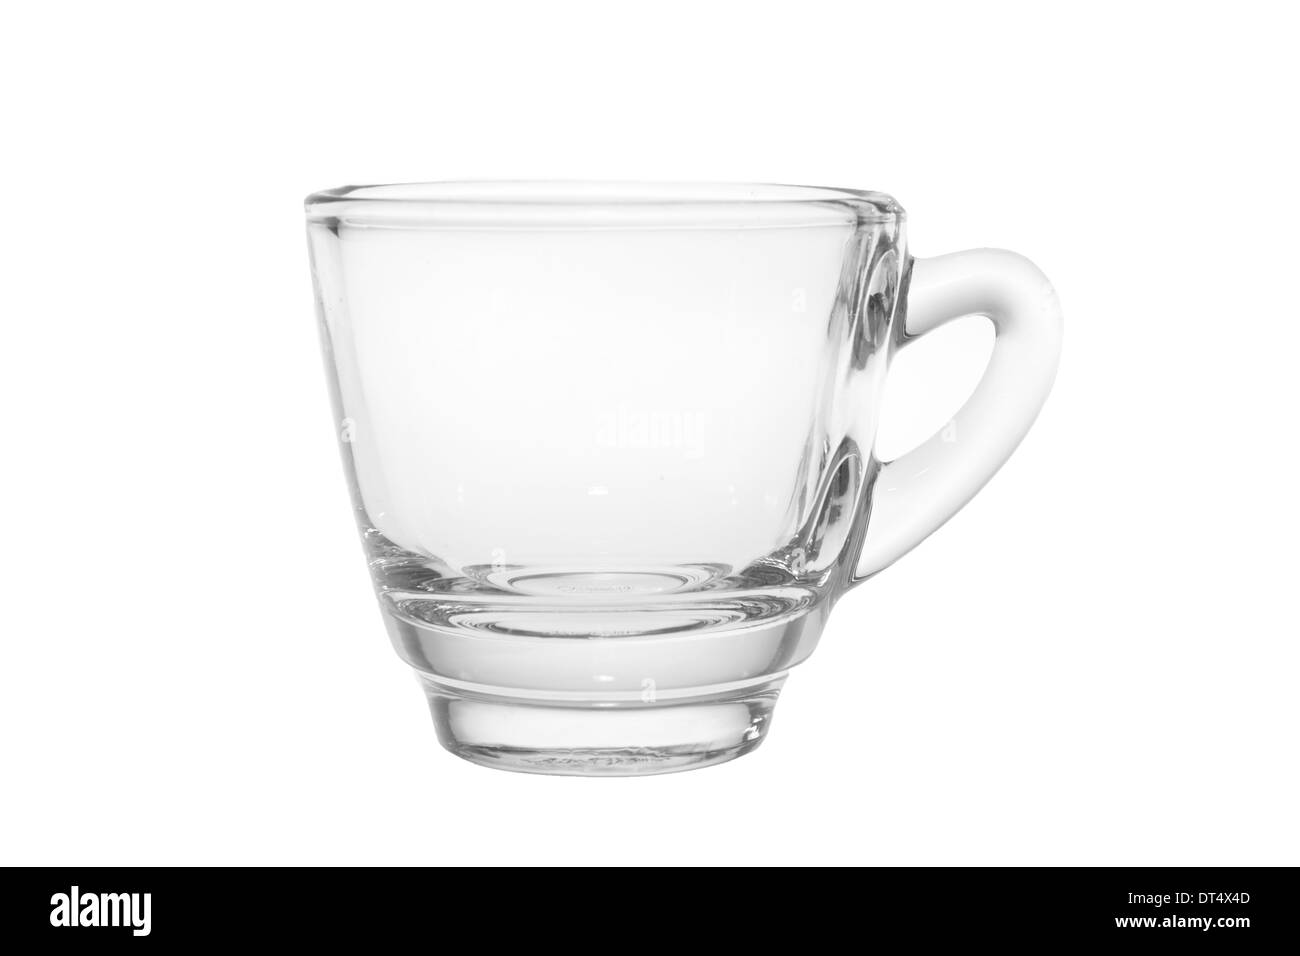 https://c8.alamy.com/comp/DT4X4D/empty-espresso-shot-glass-isolated-on-white-background-DT4X4D.jpg